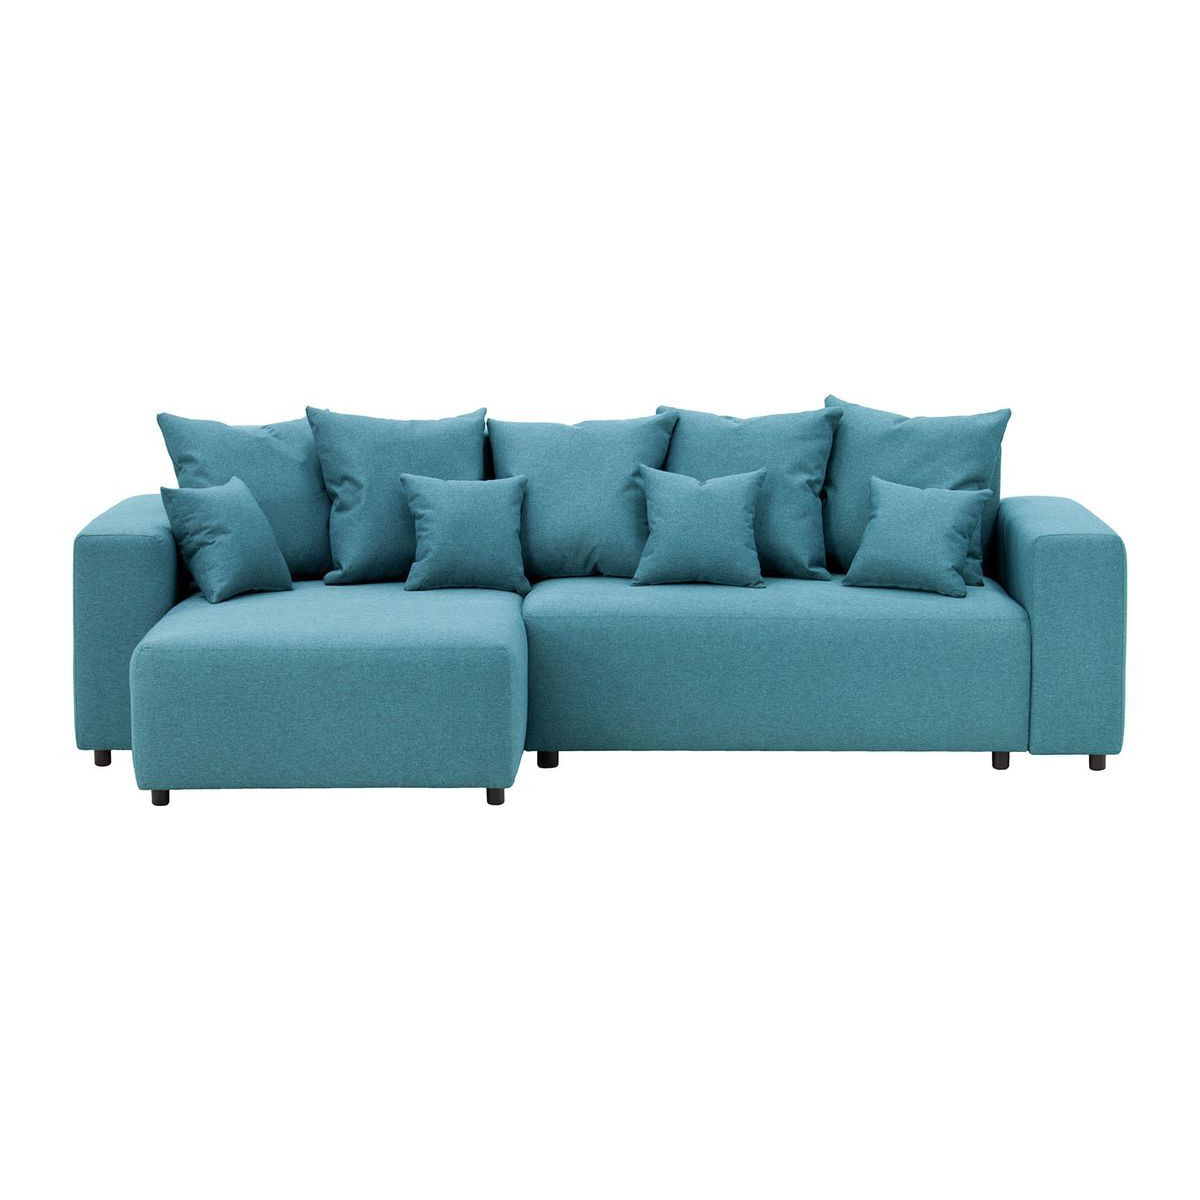 Homely Left Hand Corner Sofa Bed, turquoise - image 1